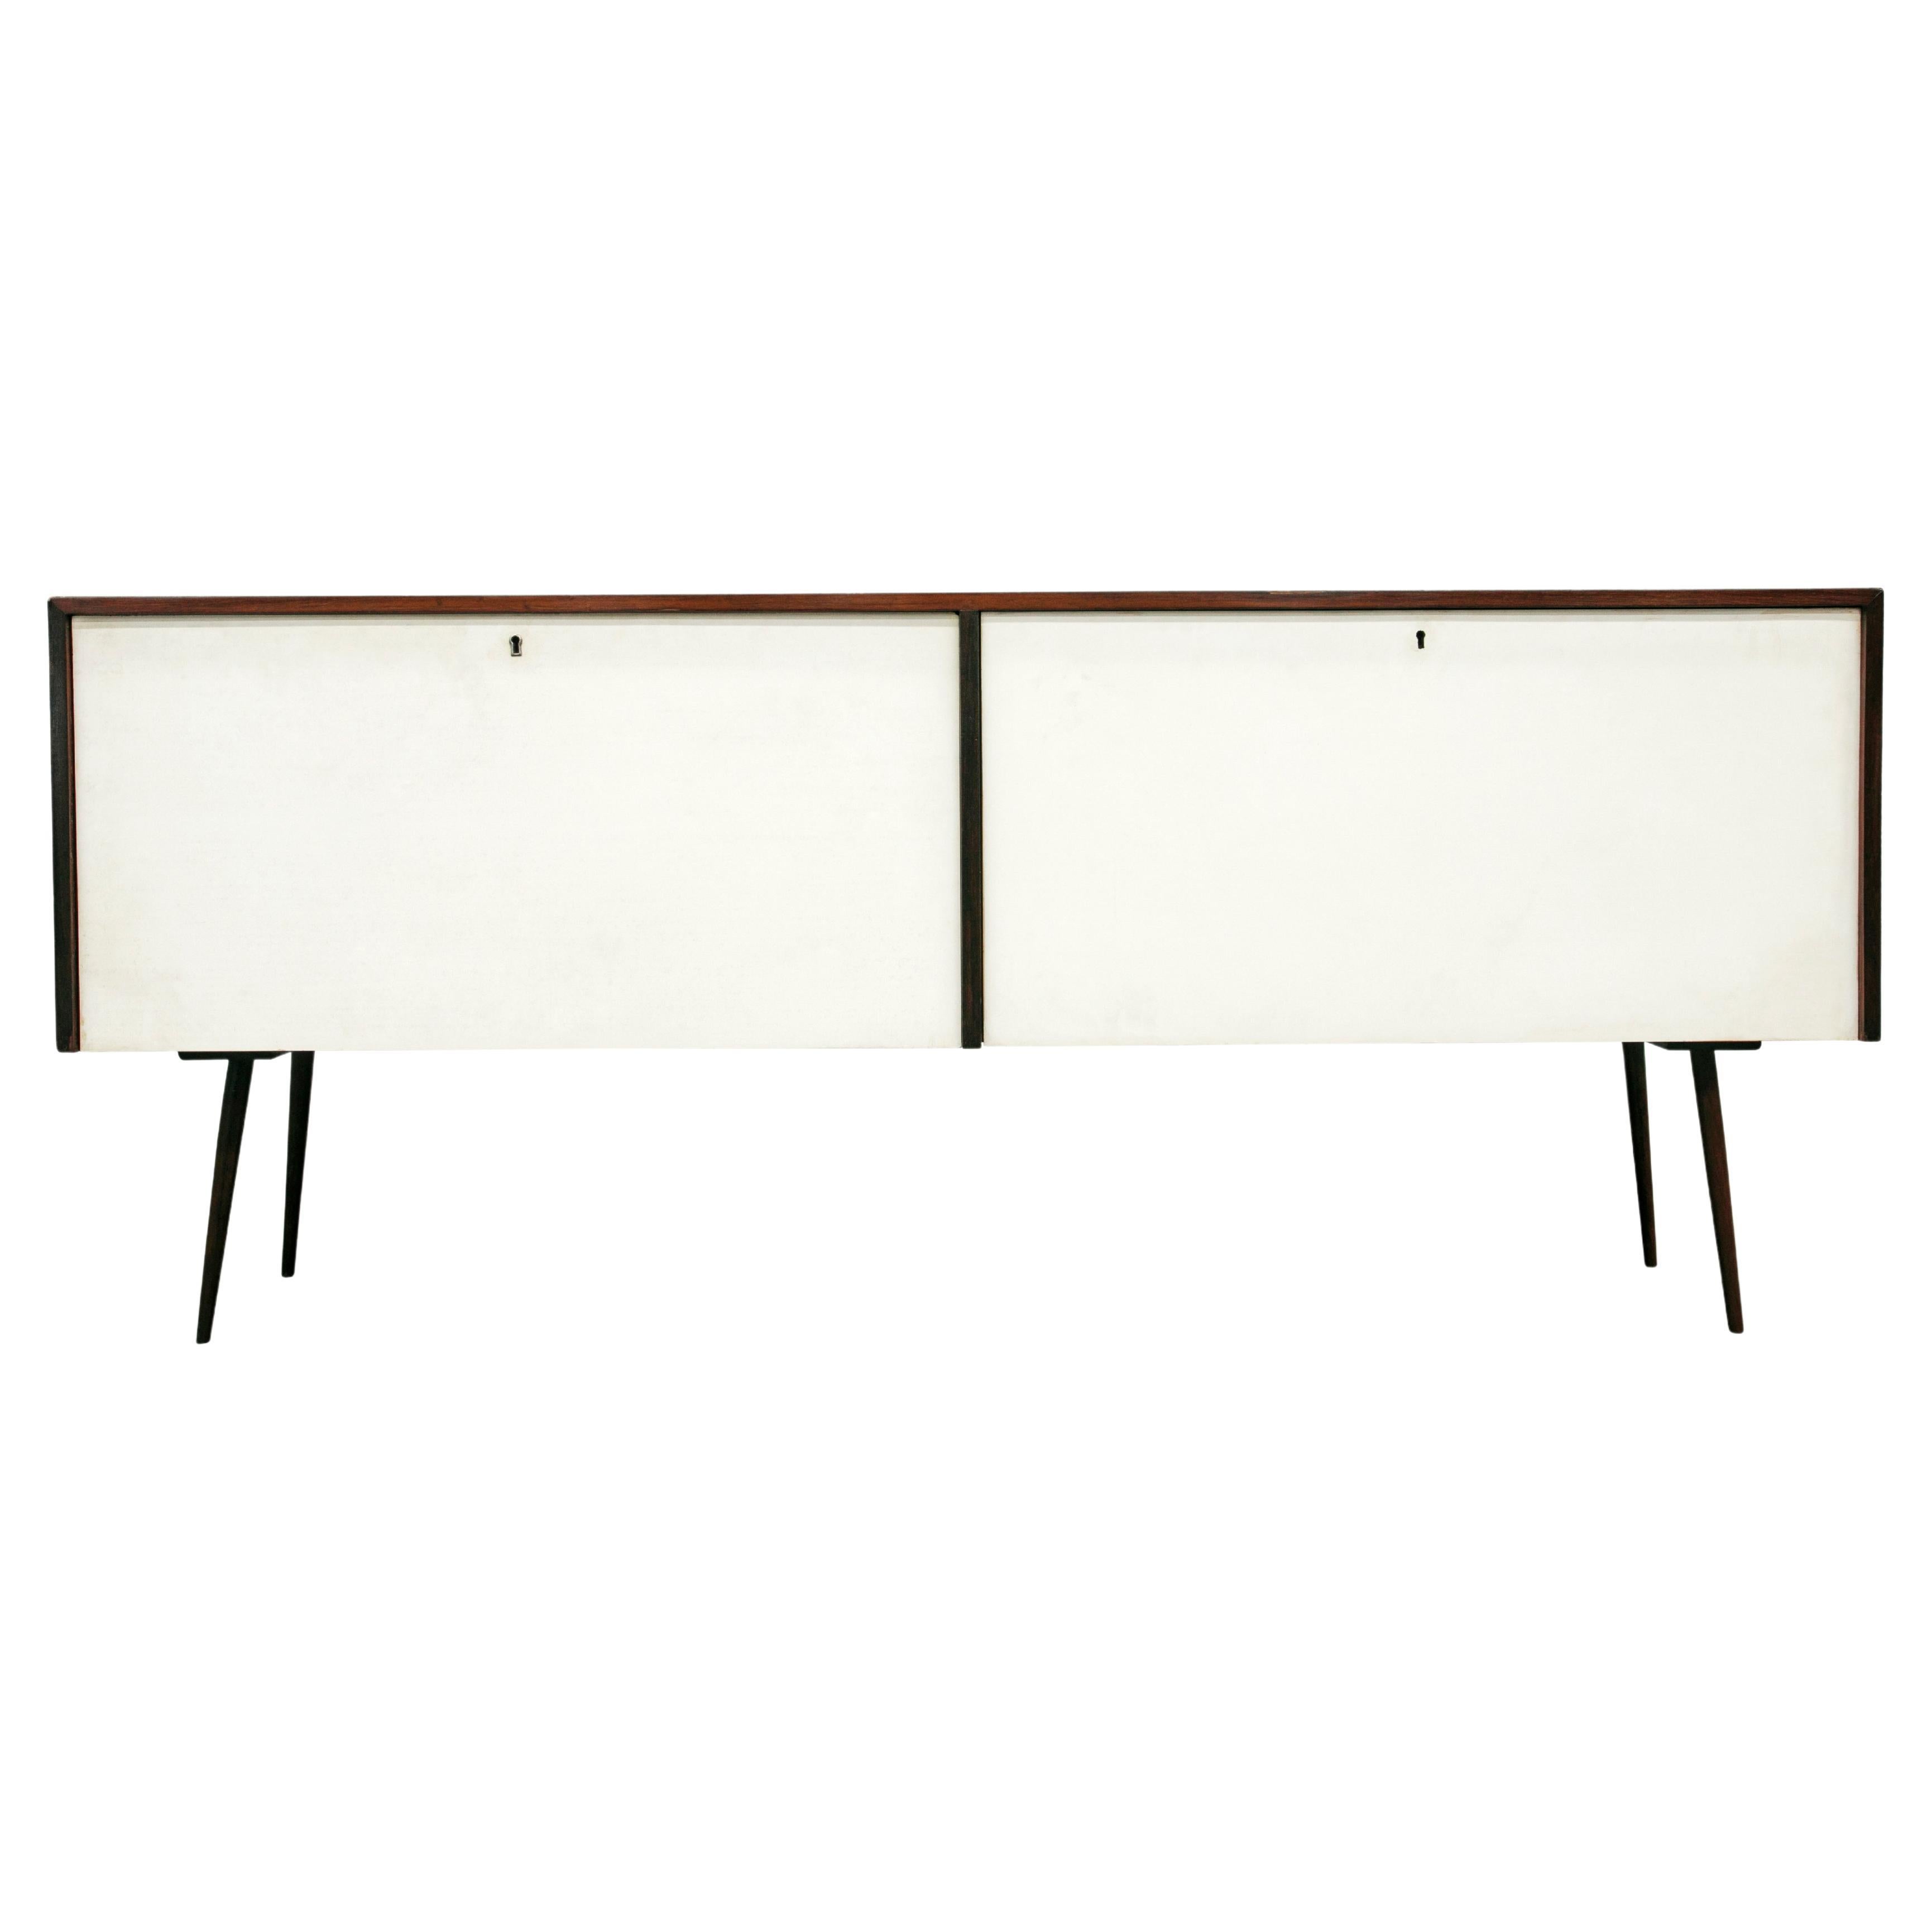 Brazilian Modern Bar in Rosewood and White Finish, by Forma, 1960s, Brazil